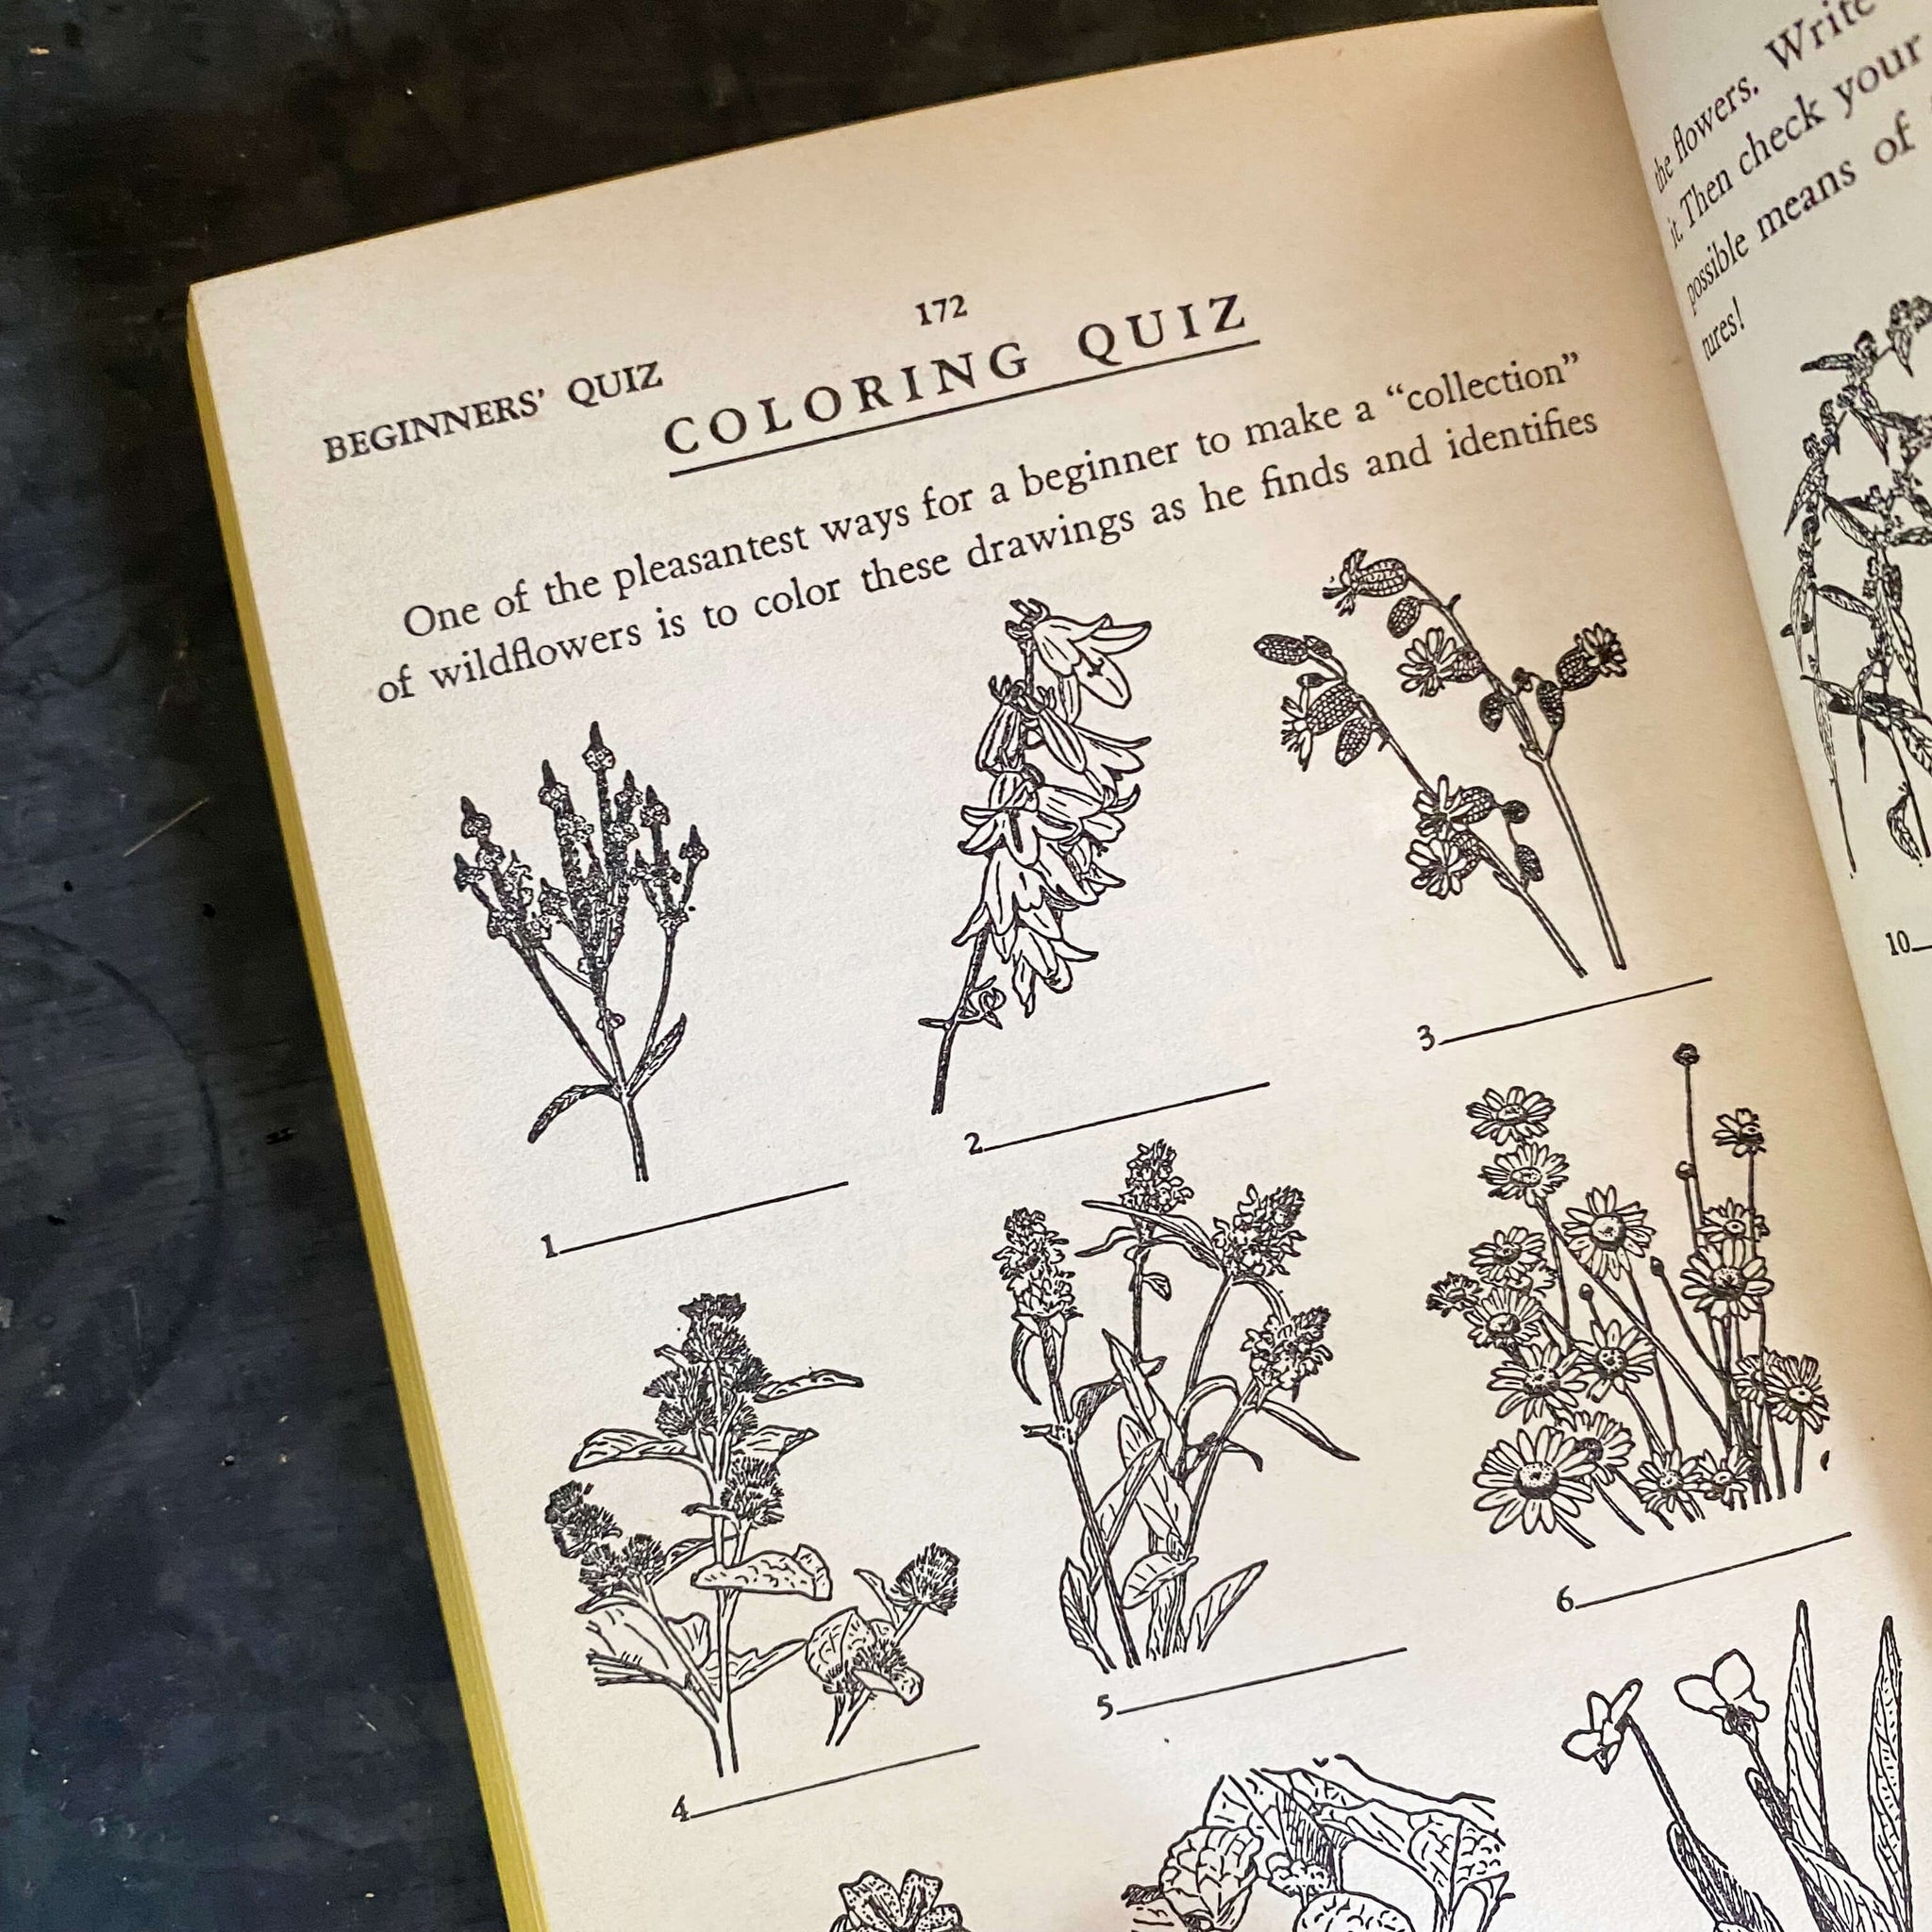 The Pocket Guide to the Wildflowers by Samuel Gottscho circa 1951